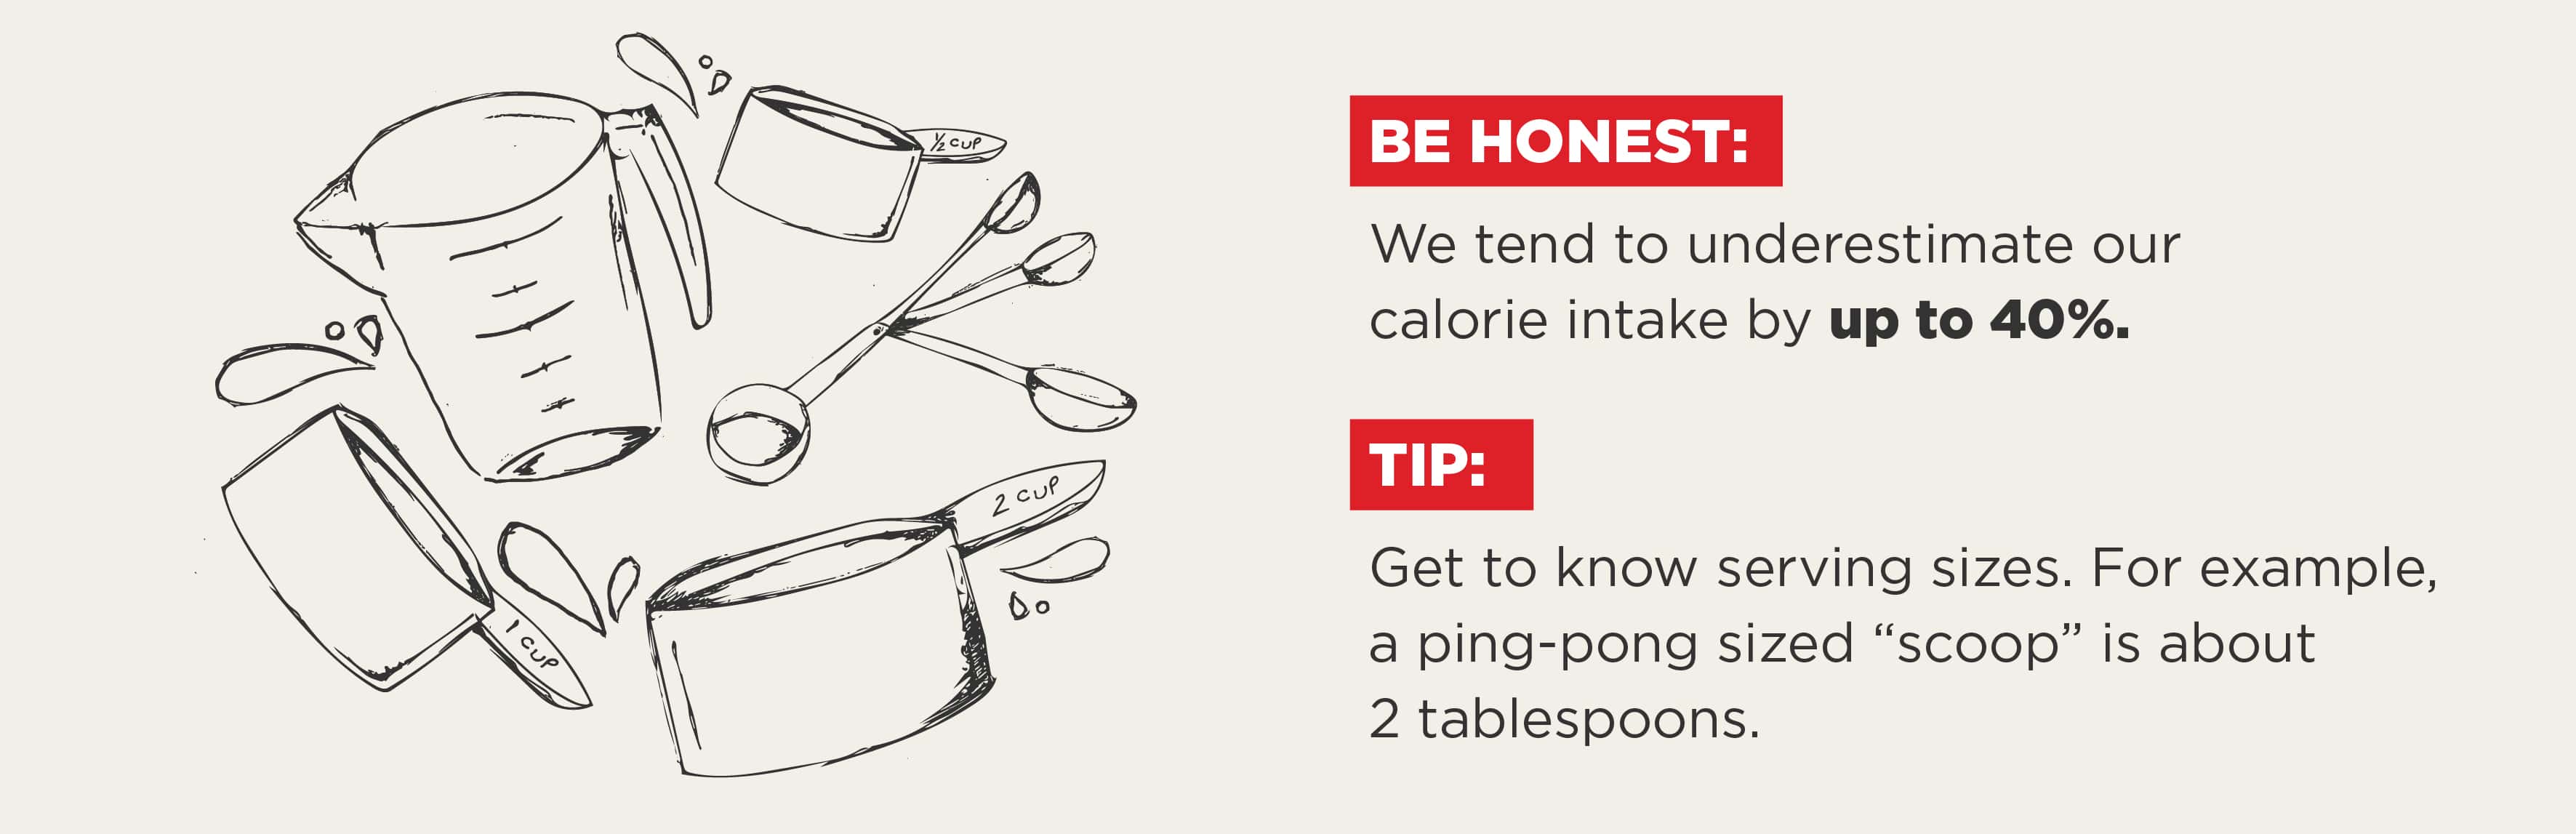 Tip: Get to know serving sizes. For example, a ping-pong sized 'scoop' is about 2 tablespoons.